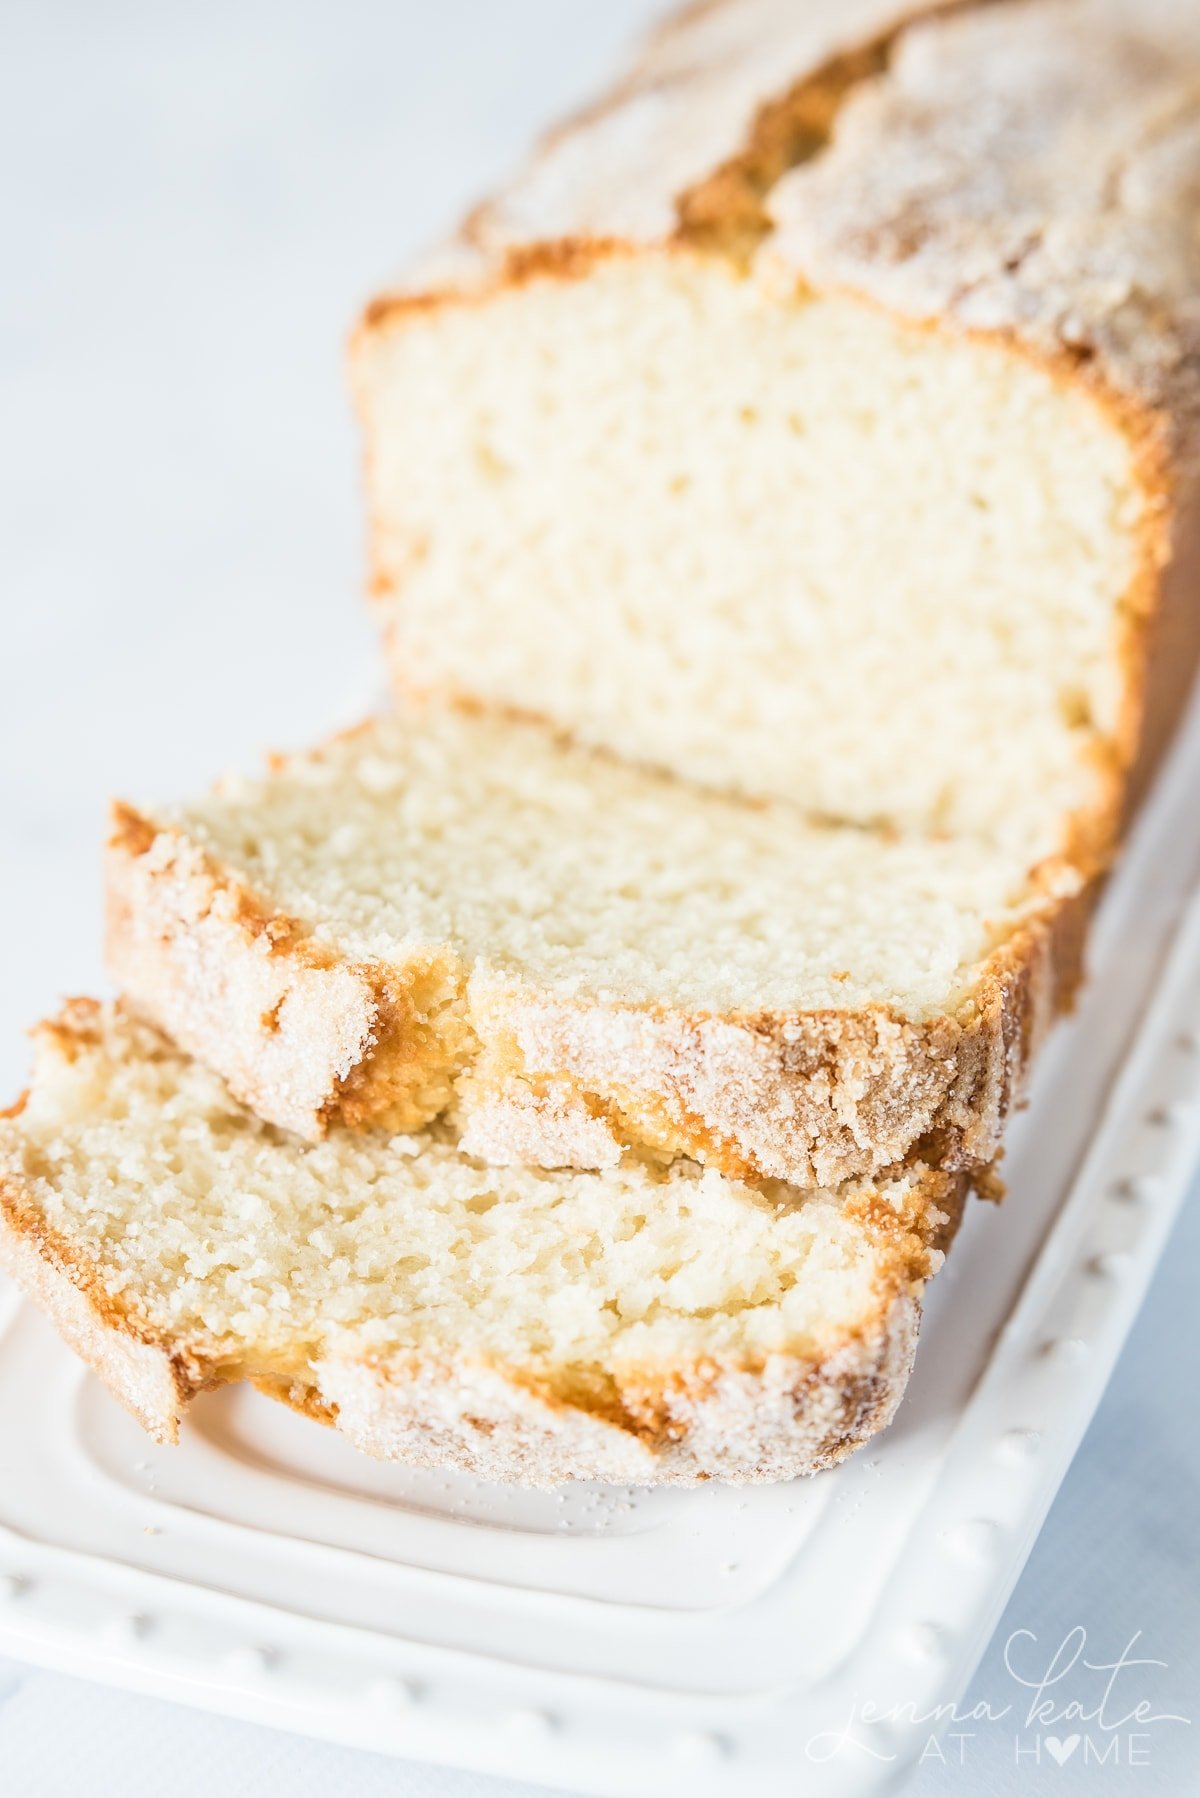 This sweet bread recipe requires no yeast, is light and fluffy and makes for a delicious breakfast or dessert.